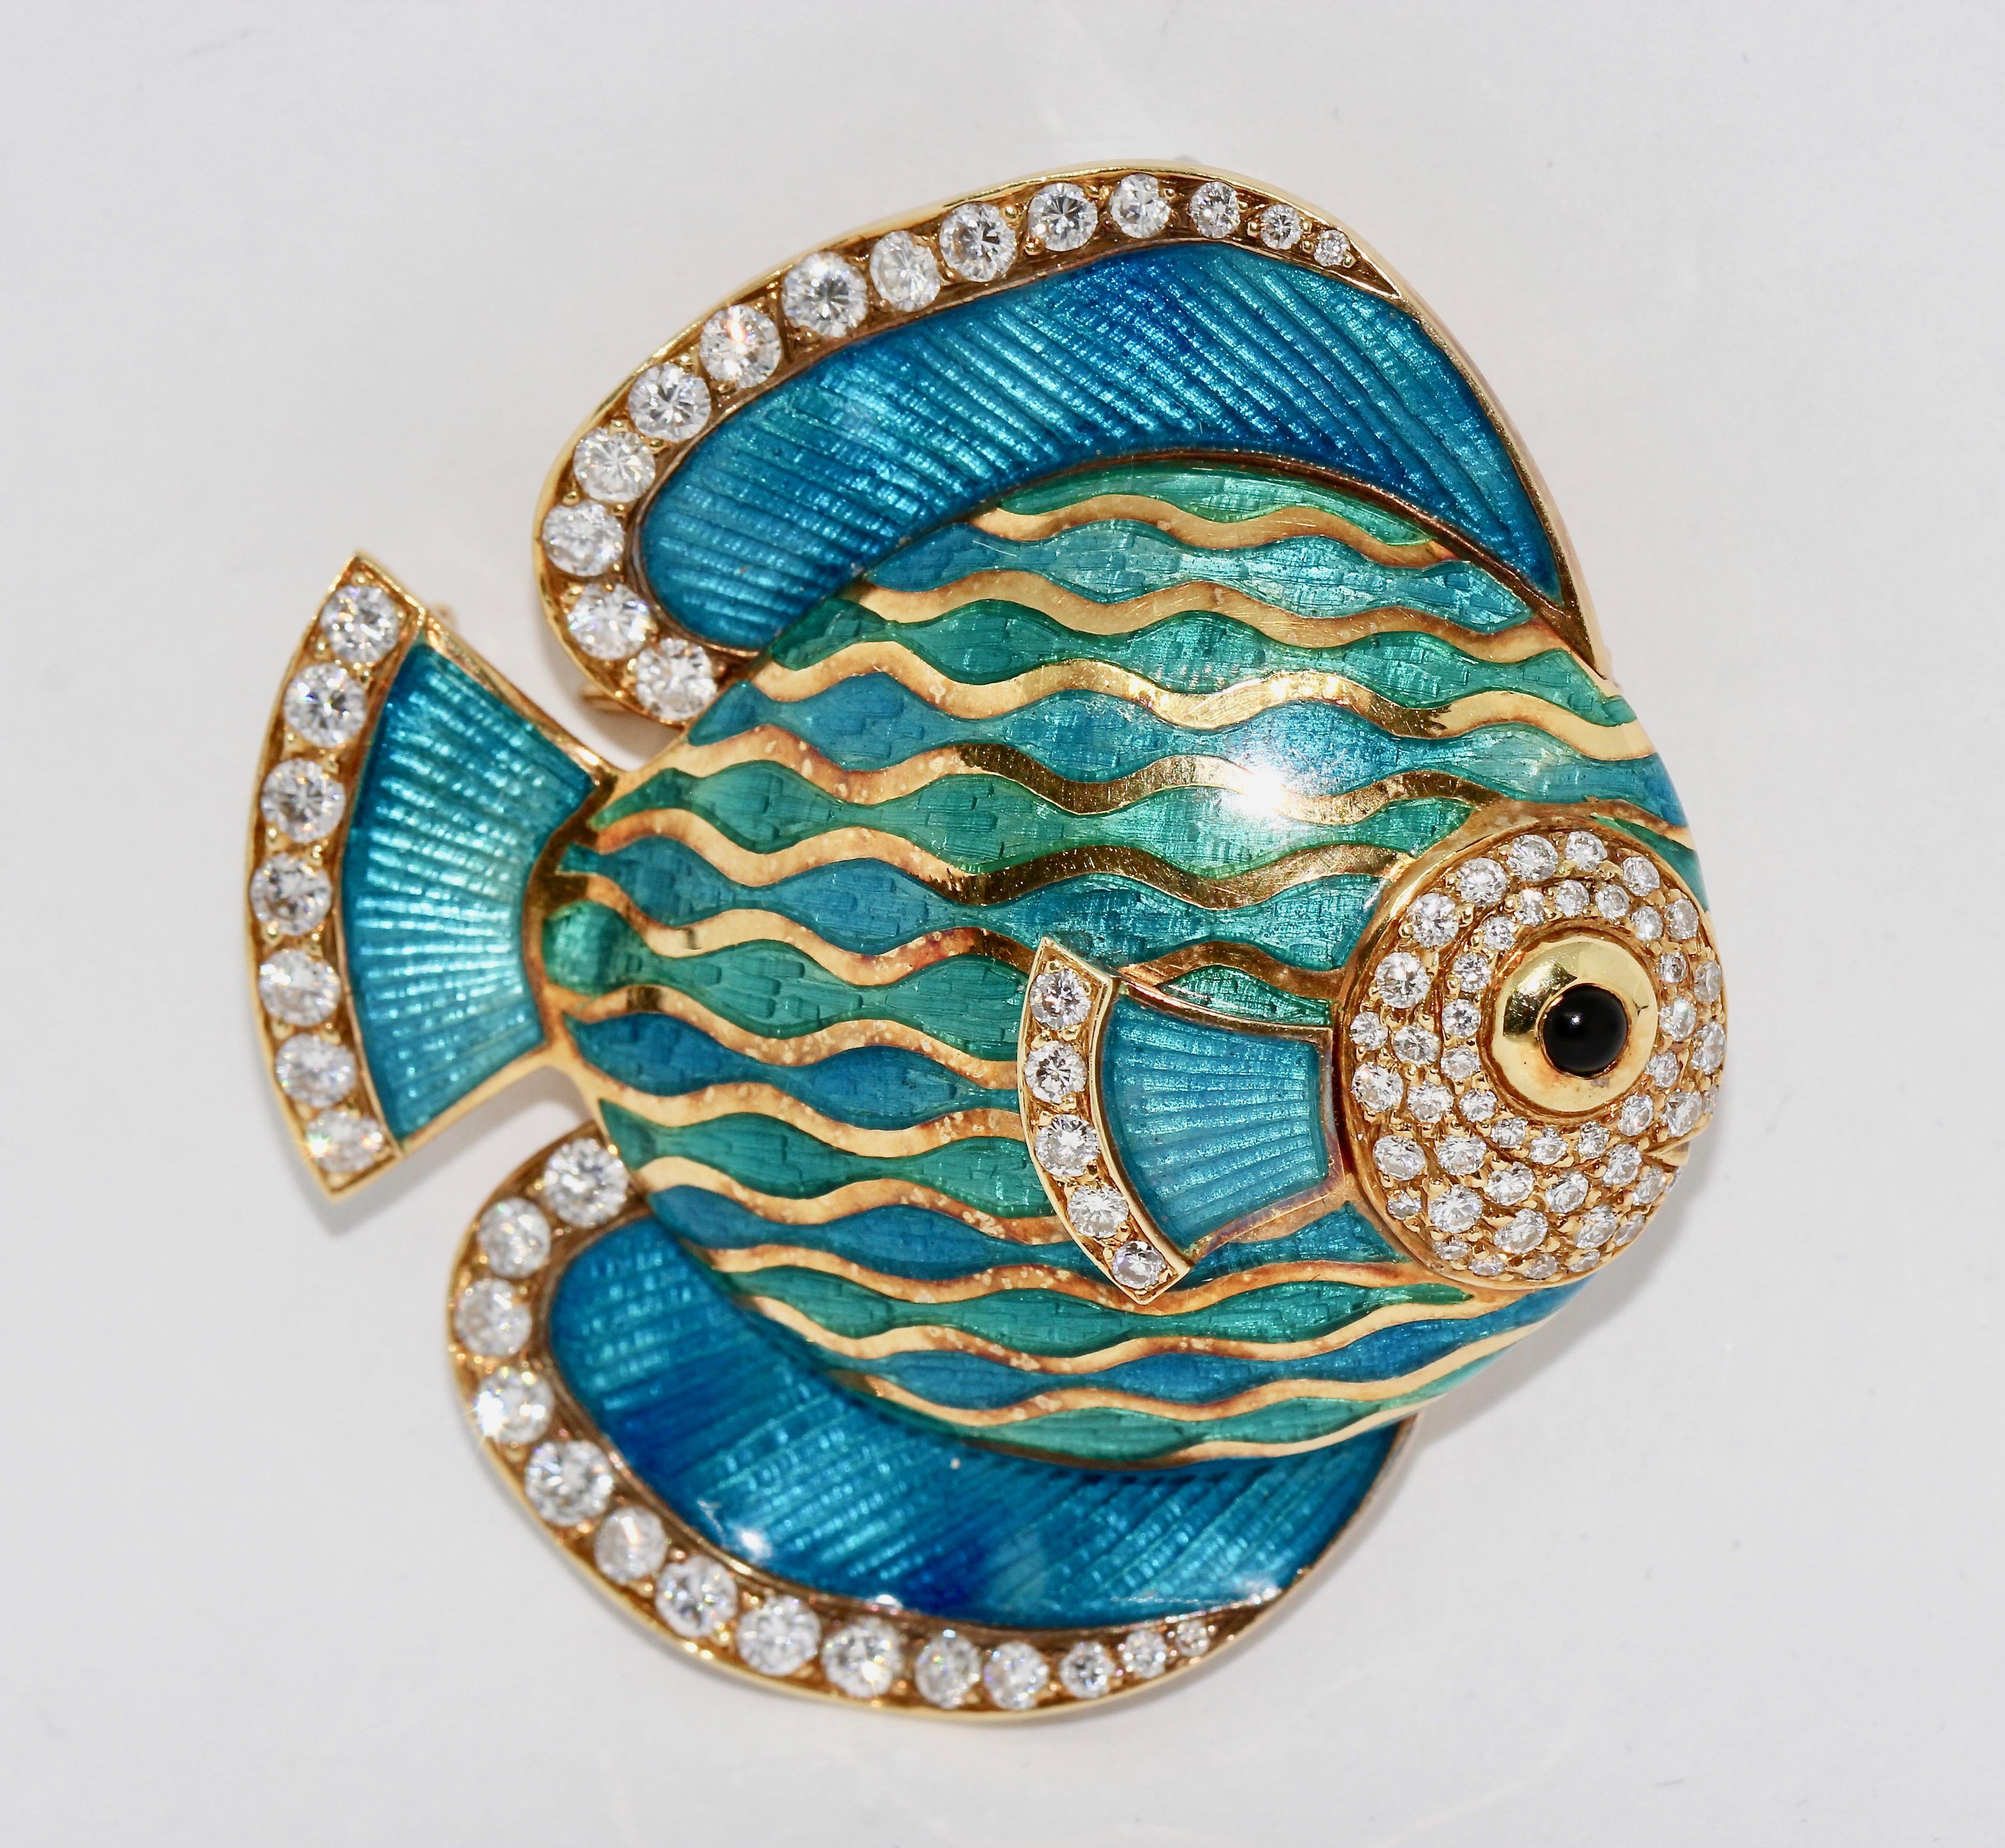 Beautiful and luxurious enamel brooch, pendant, (enhancer) as an exotic ornamental fish, 18 karat gold and diamonds.

Wearable as brooch or pendant.

The brilliants have a very good clarity and perfect white color.
The fish eye is kept as